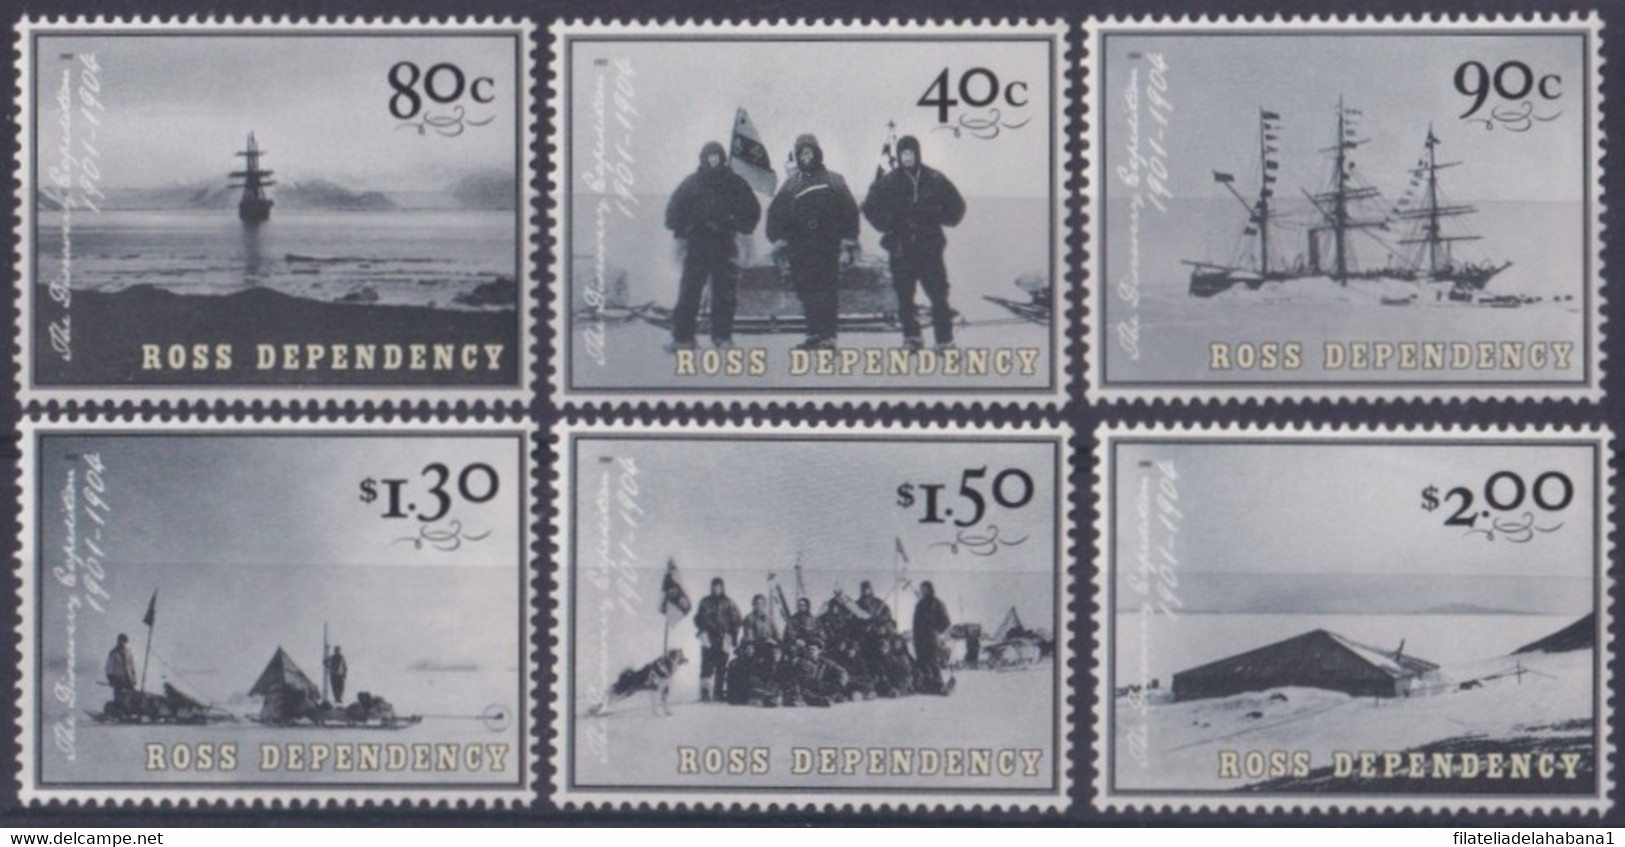 F-EX33156 ROSS POLAR ANTARCTIC 2002 MNH DISCOVERY EXPEDITION 1901-04 SHIP. - Research Programs